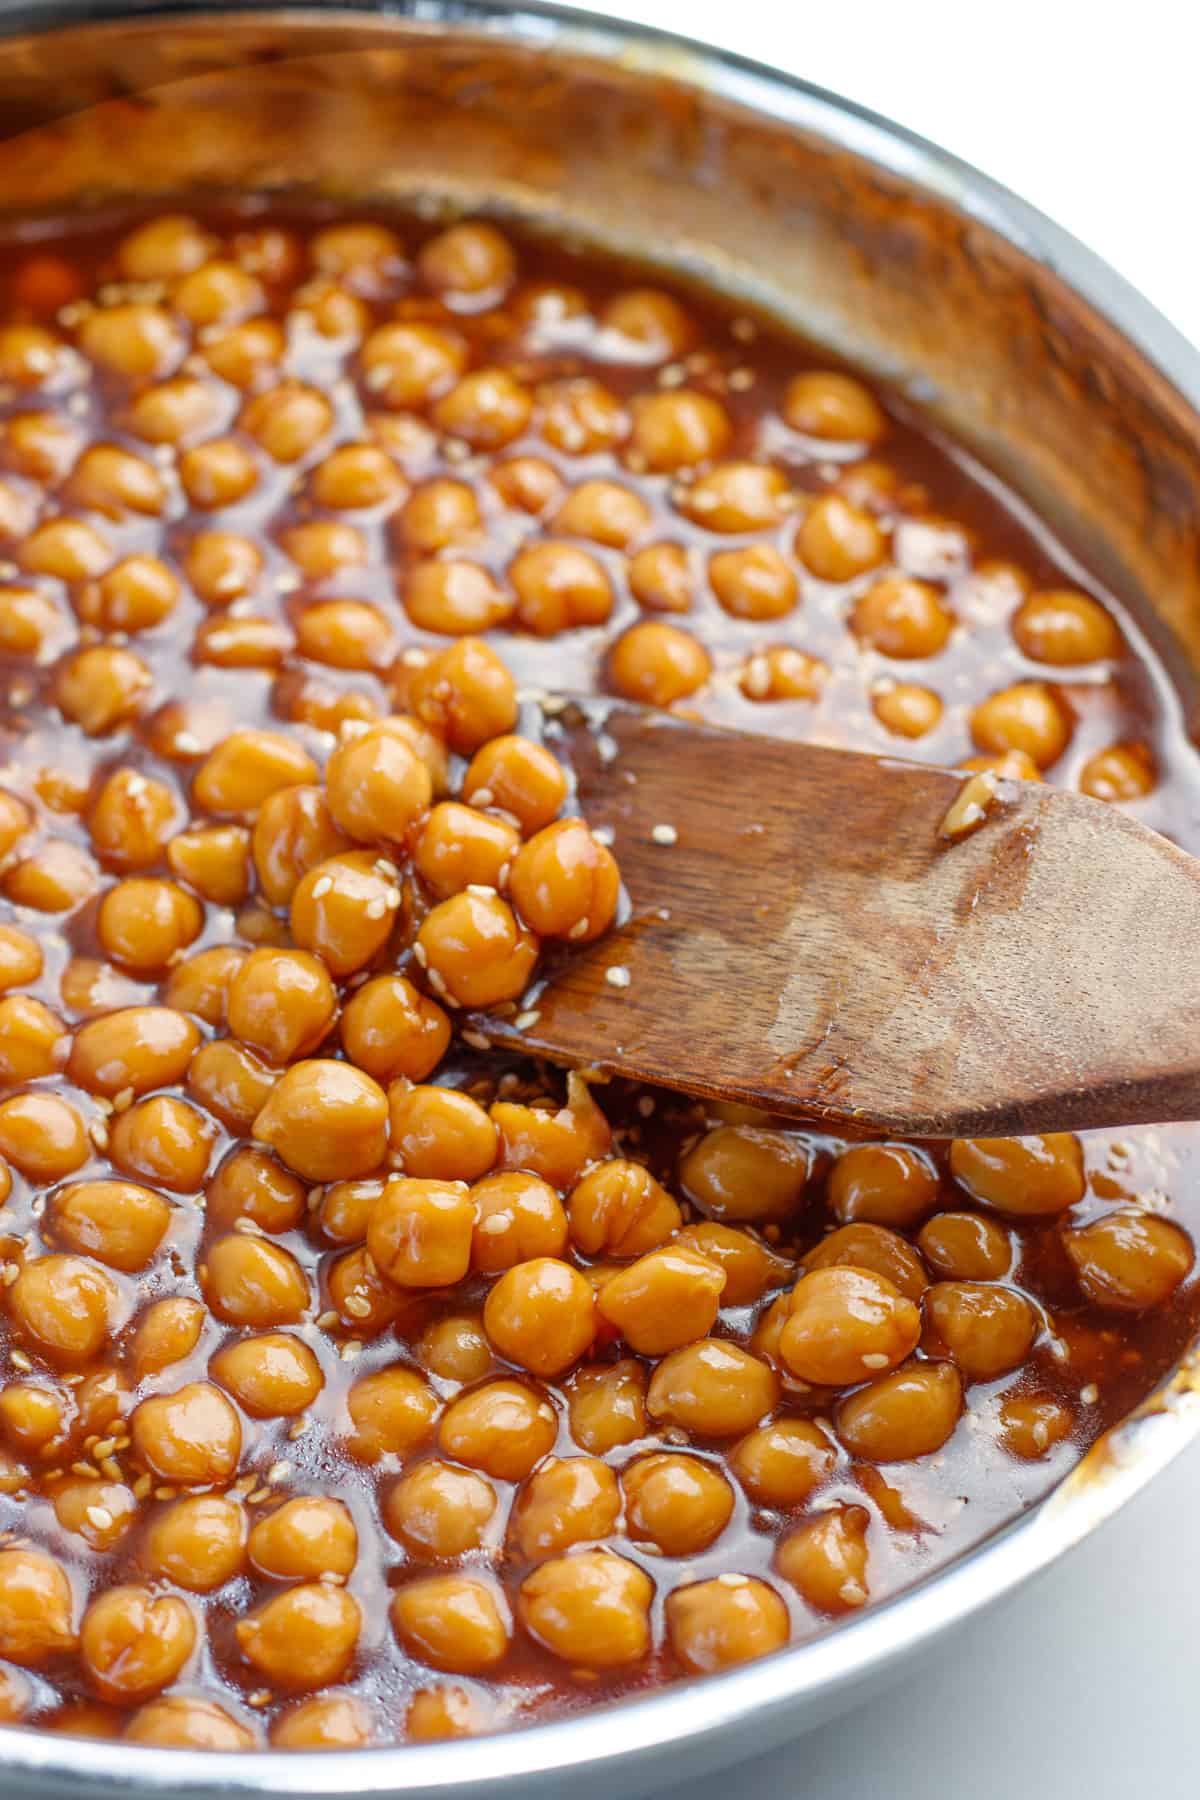 Sticky sesame chickpeas in a stainless steel pan with a wooden spoon in the pan.